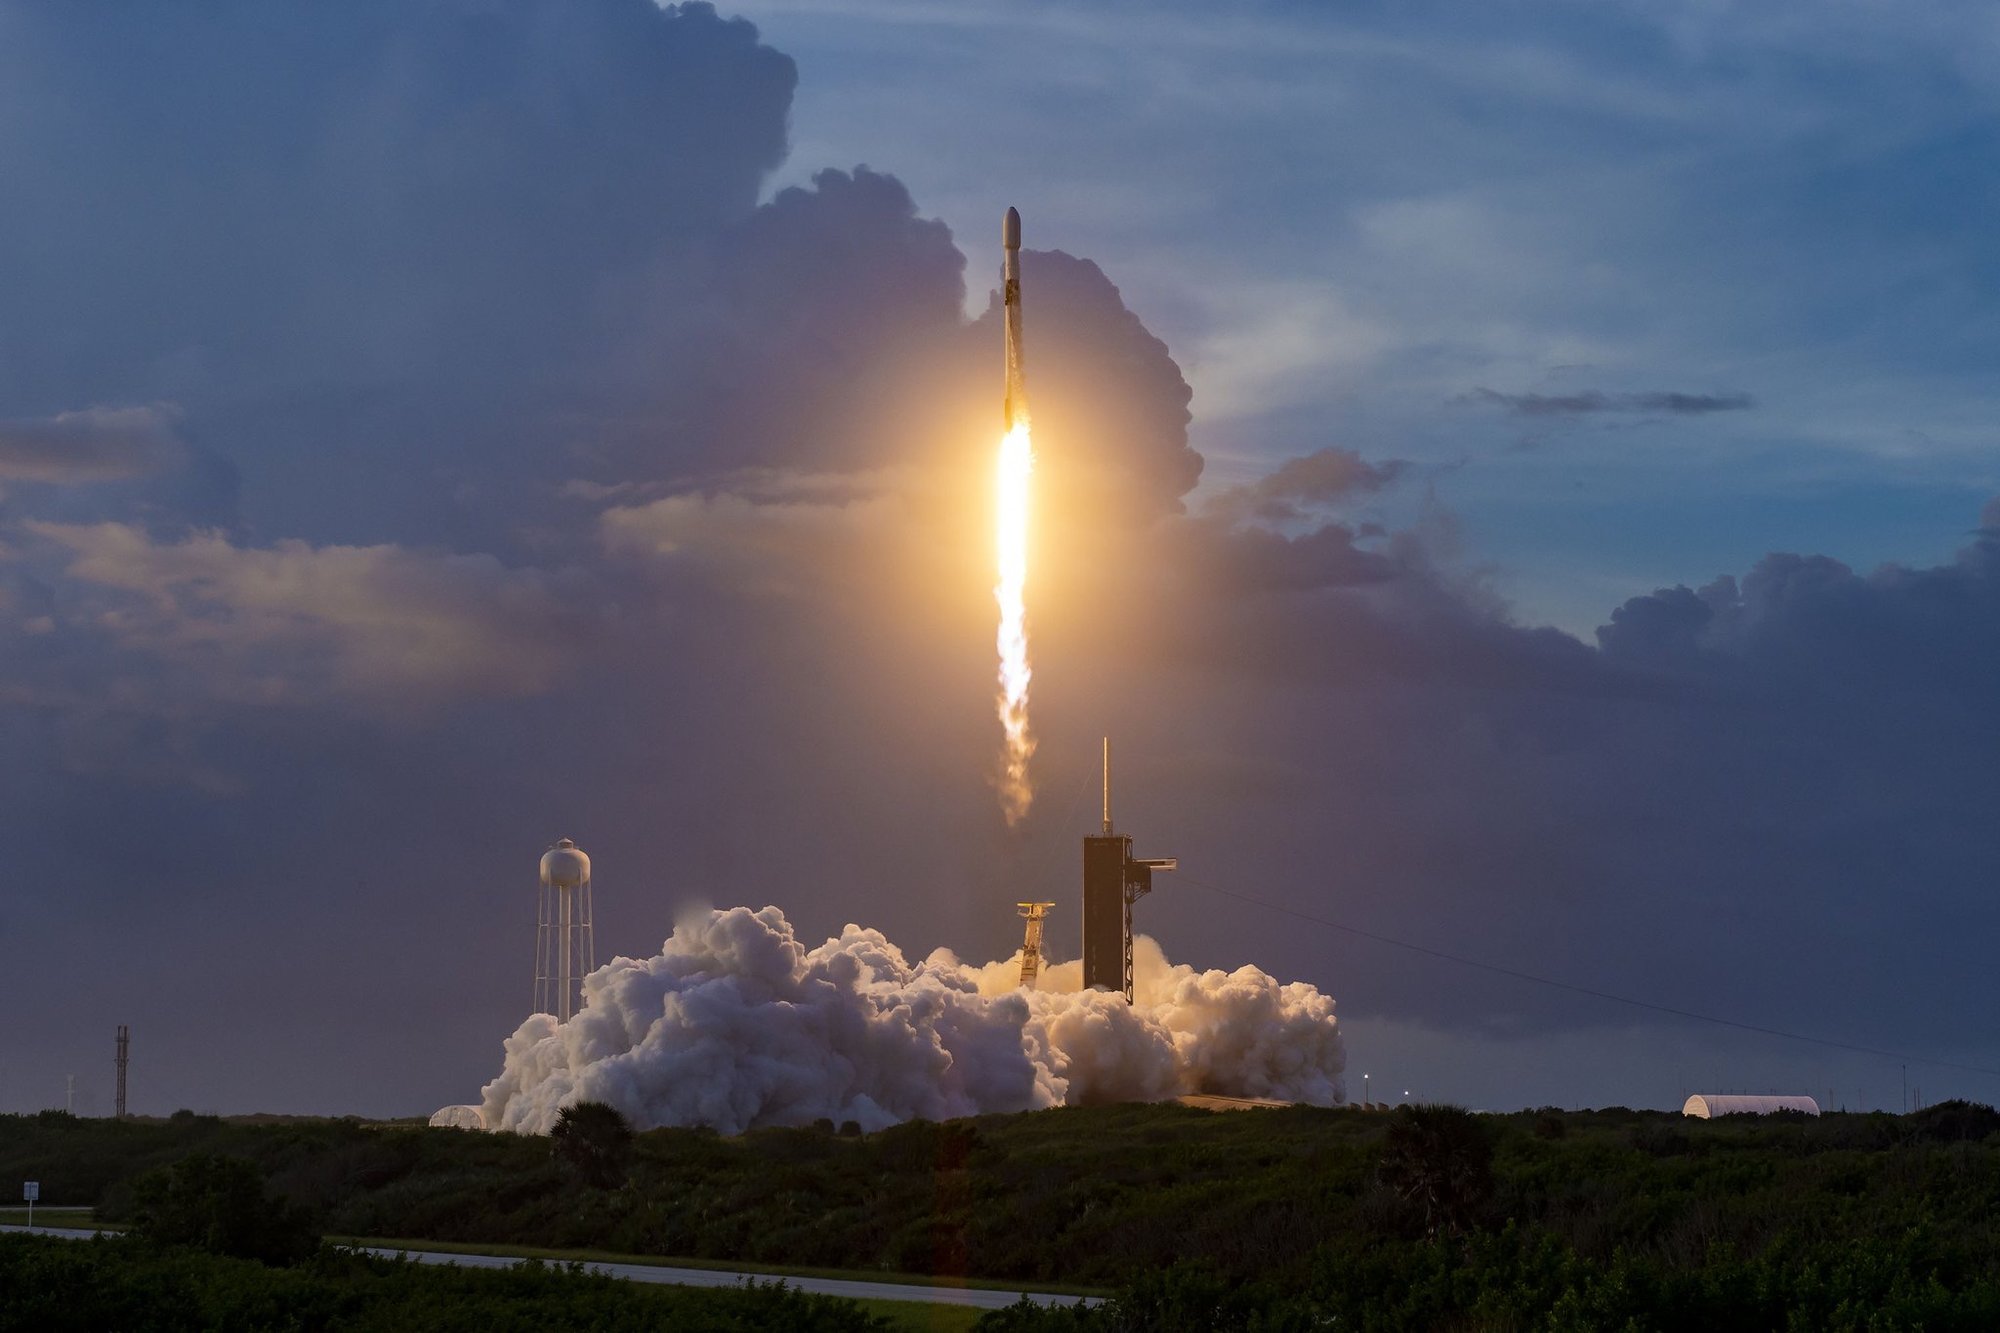 On Tuesday, October 6 at 7:29 a.m. EDT, 11:29 UTC, SpaceX launched 60 Starlink satellites from Launch Complex 39A (LC-39A) at Kennedy Space Center in Florida. Photo by SpaceX via Twitter.